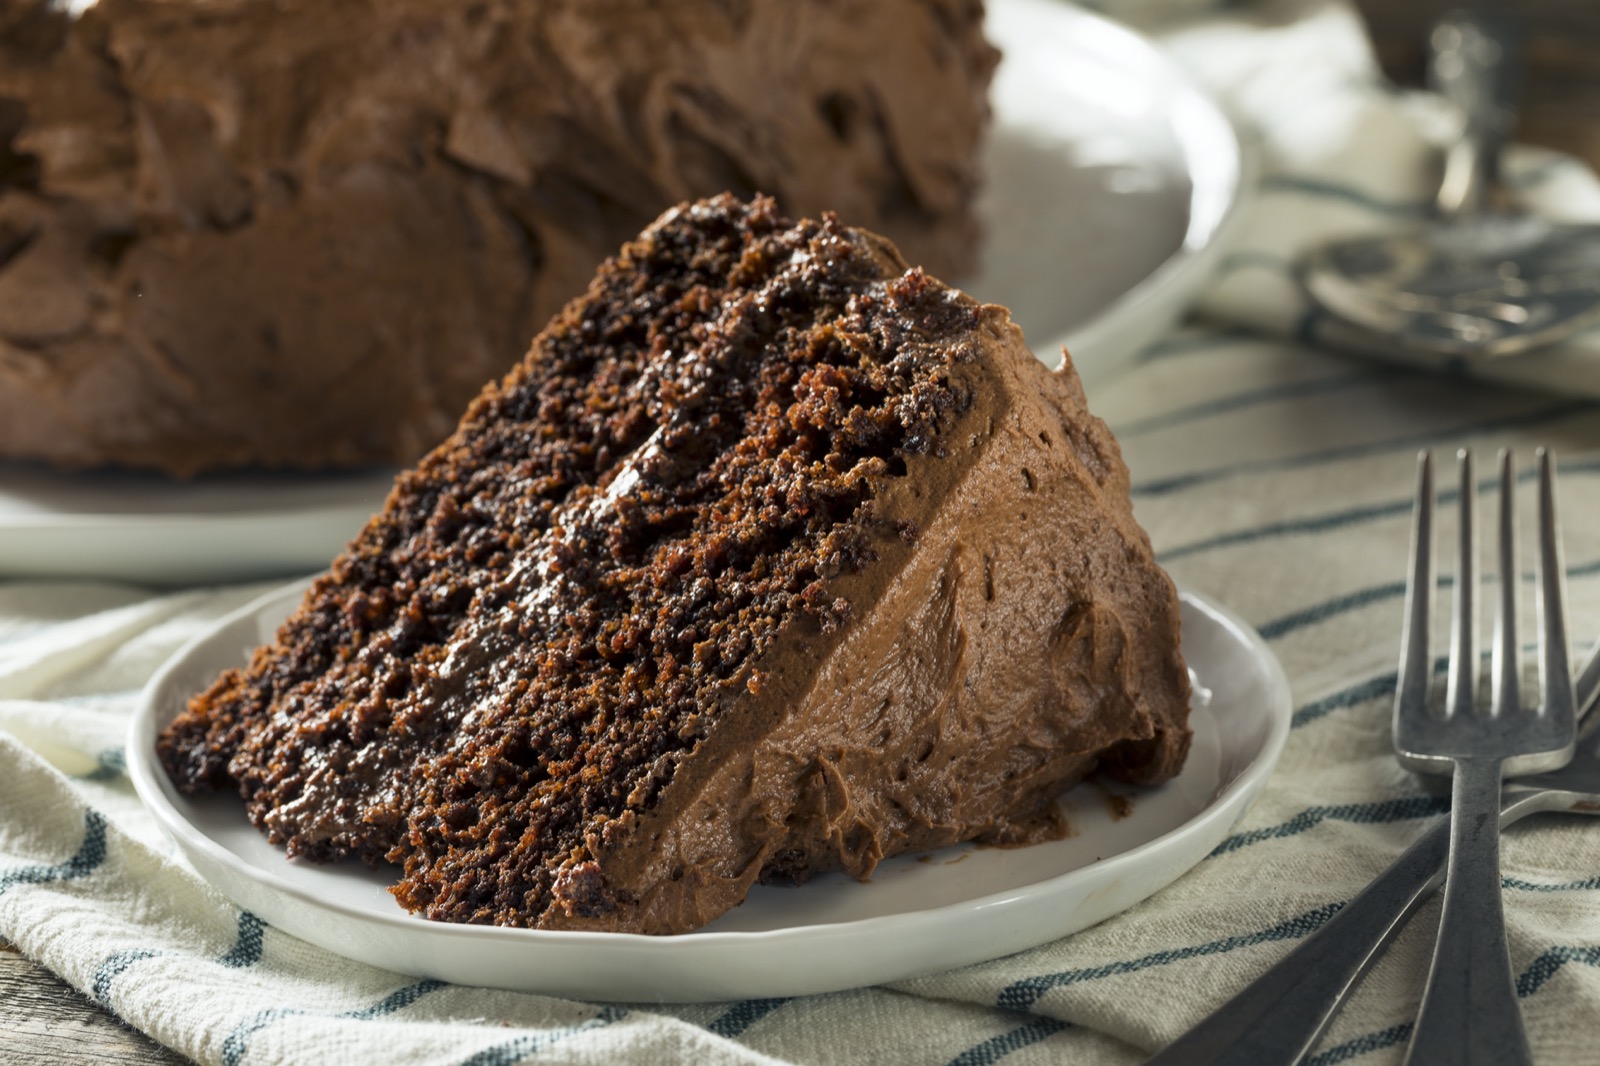 🍪 Say “Yuck” Or “Yum” to These Chocolatey Treats and We’ll Guess Your Zodiac Sign Sweet Homemade Dark Chocolate Layer Cake